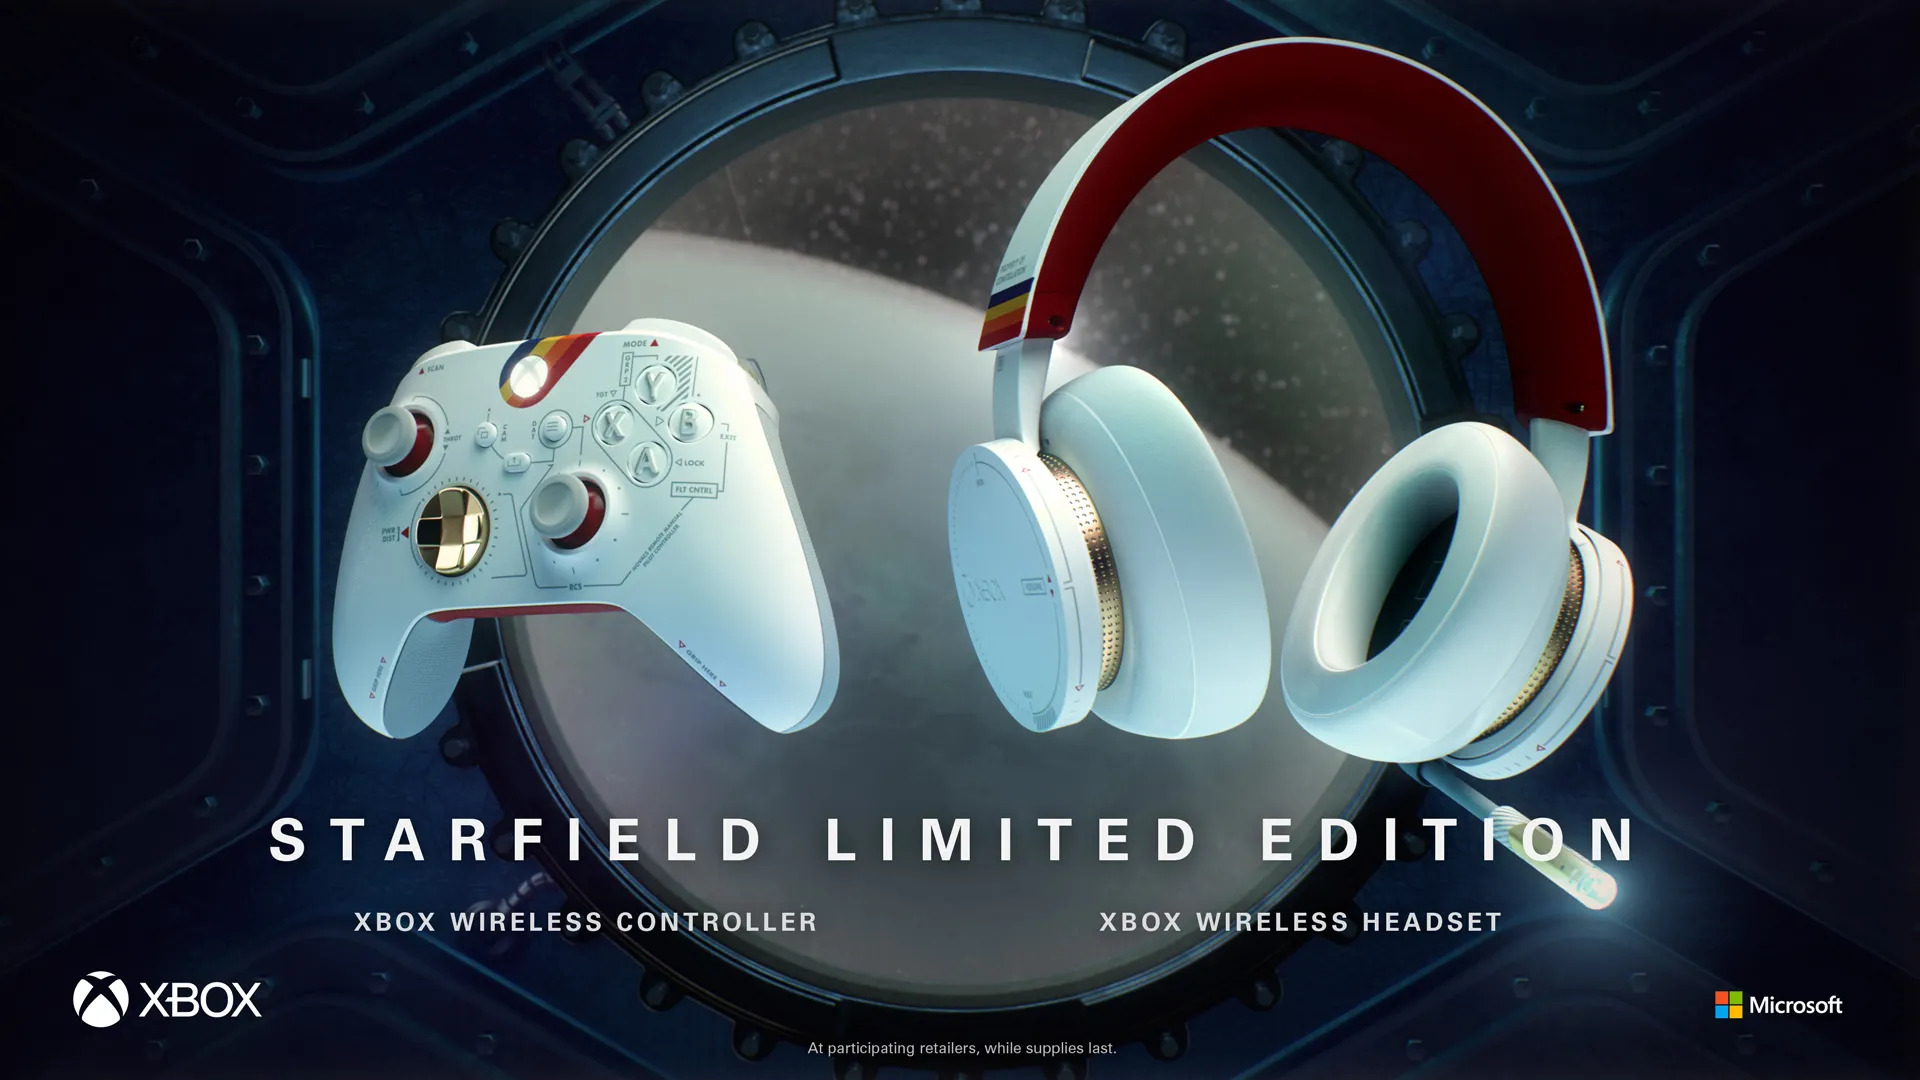 Starfield Xbox controller and headset: Where to buy, Amazon, Target, Best Buy, and more